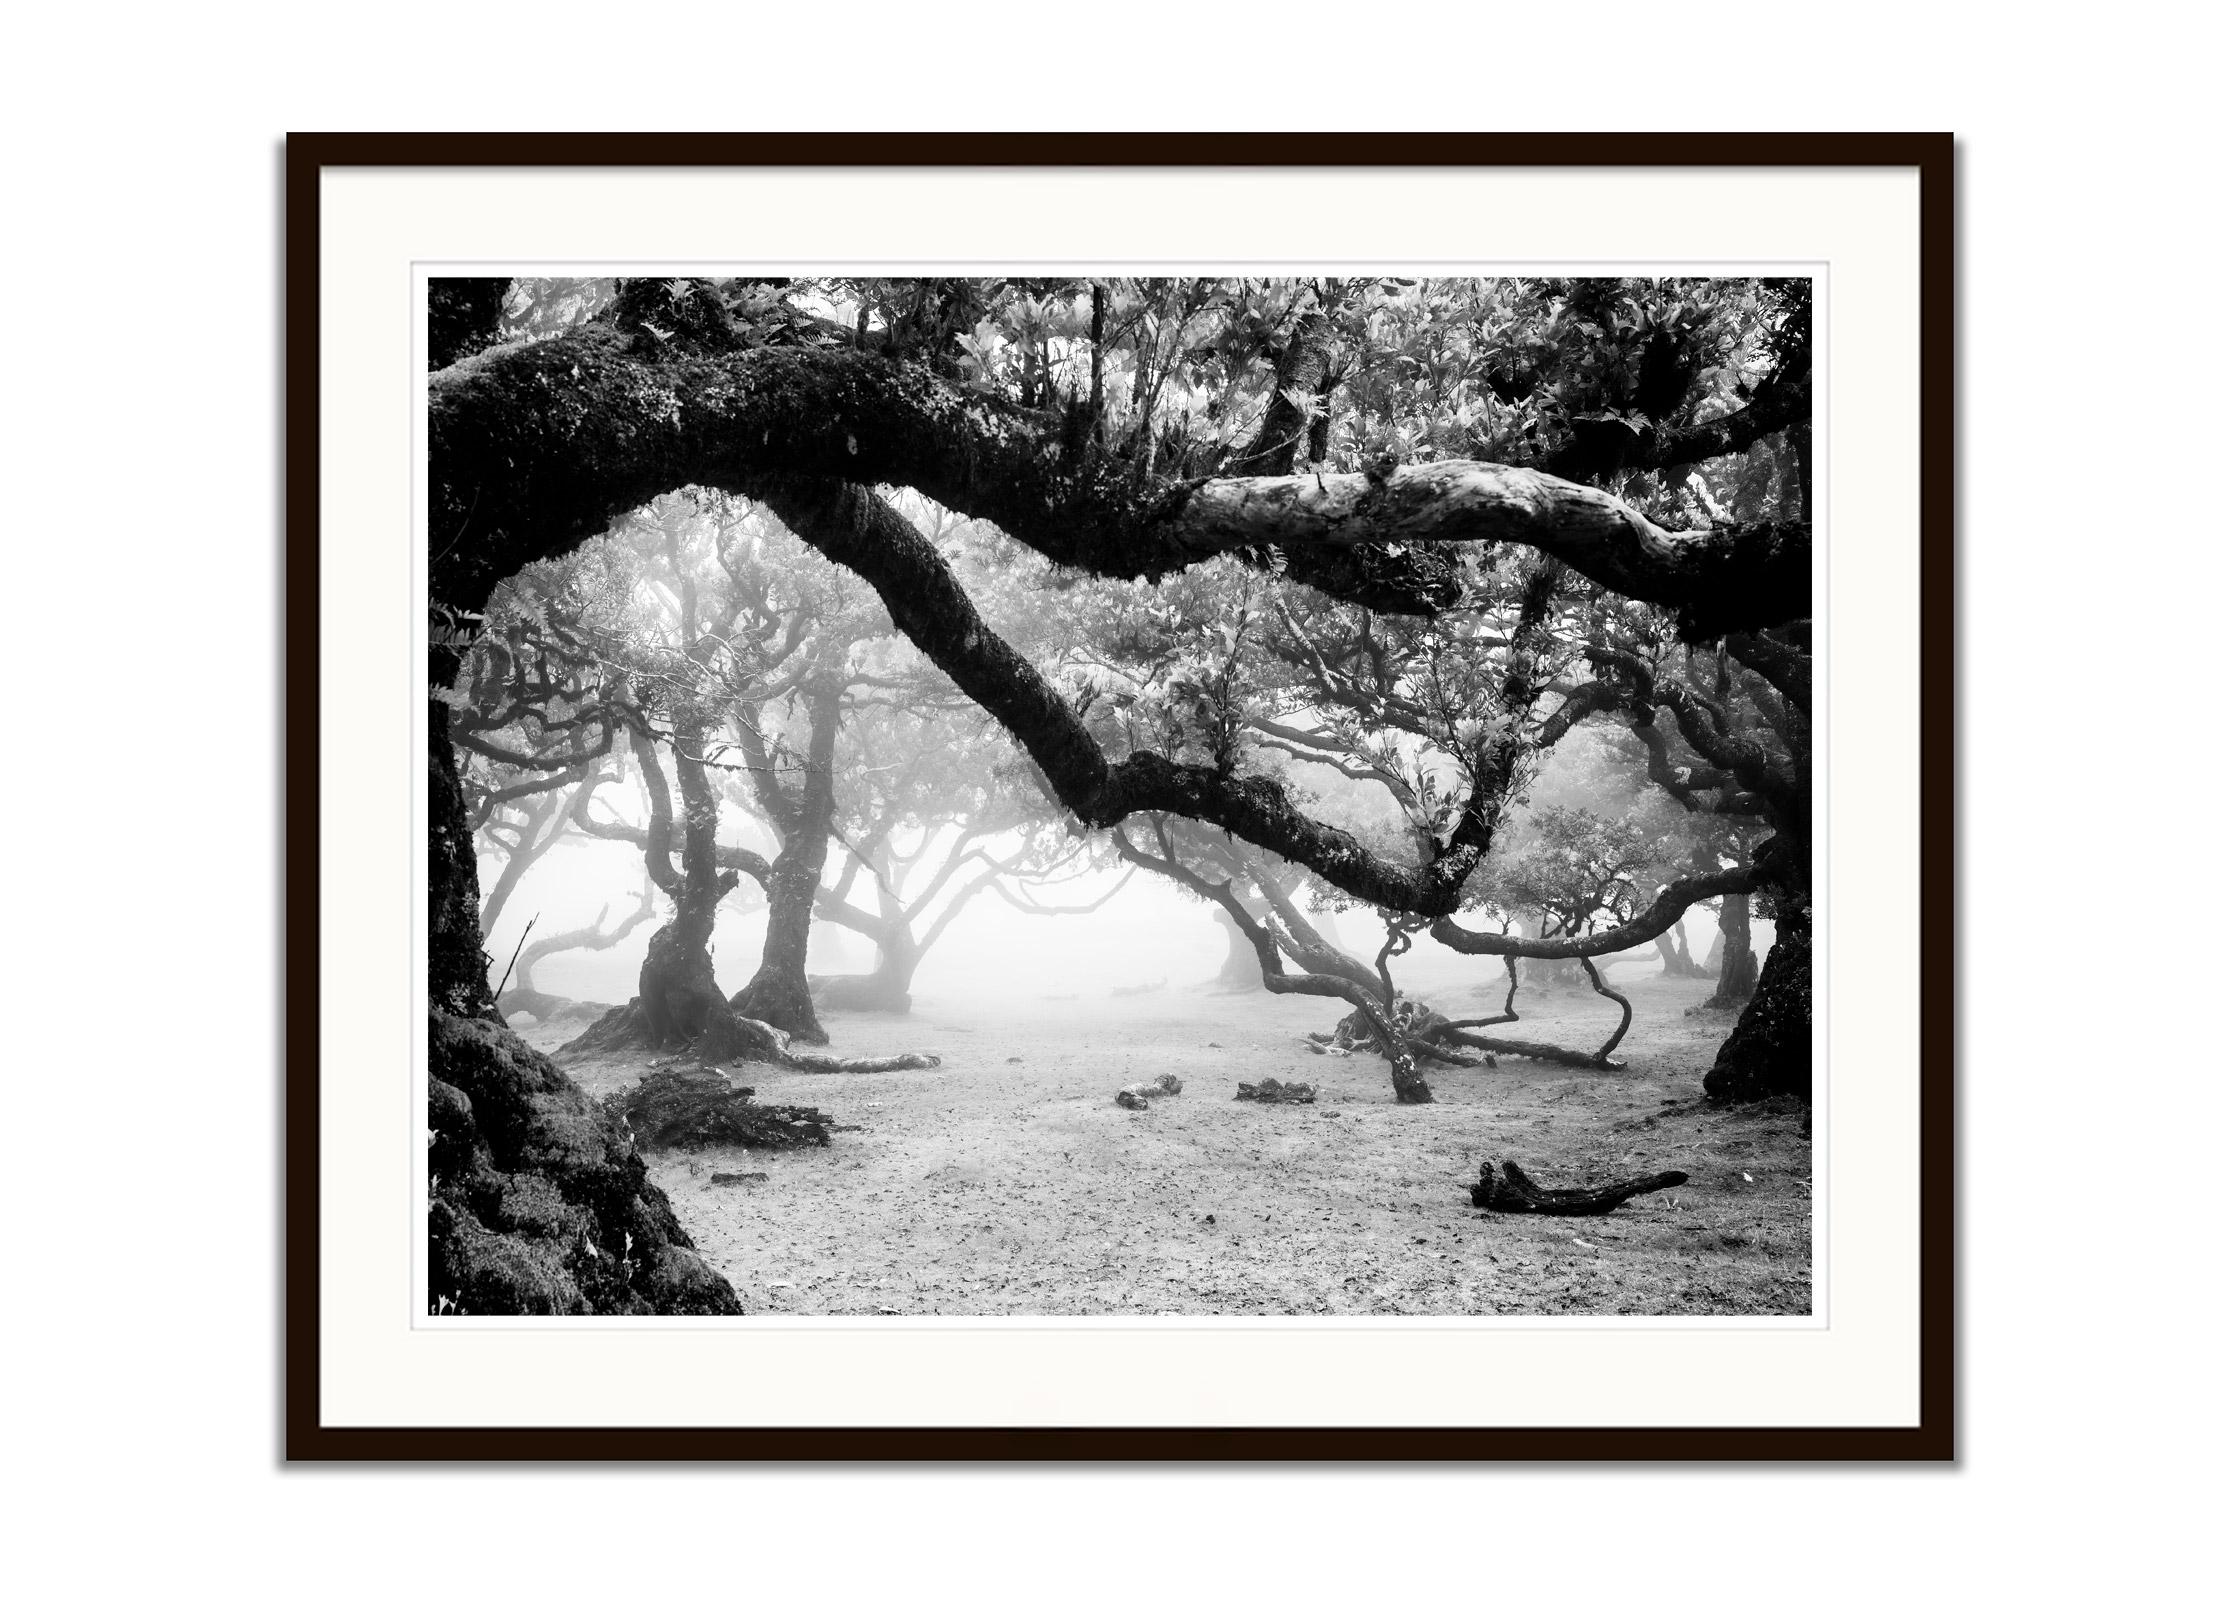 Ancient Laurisilva Forest, misty, magical trees, Madeira, B&W landscape print - Black Black and White Photograph by Gerald Berghammer